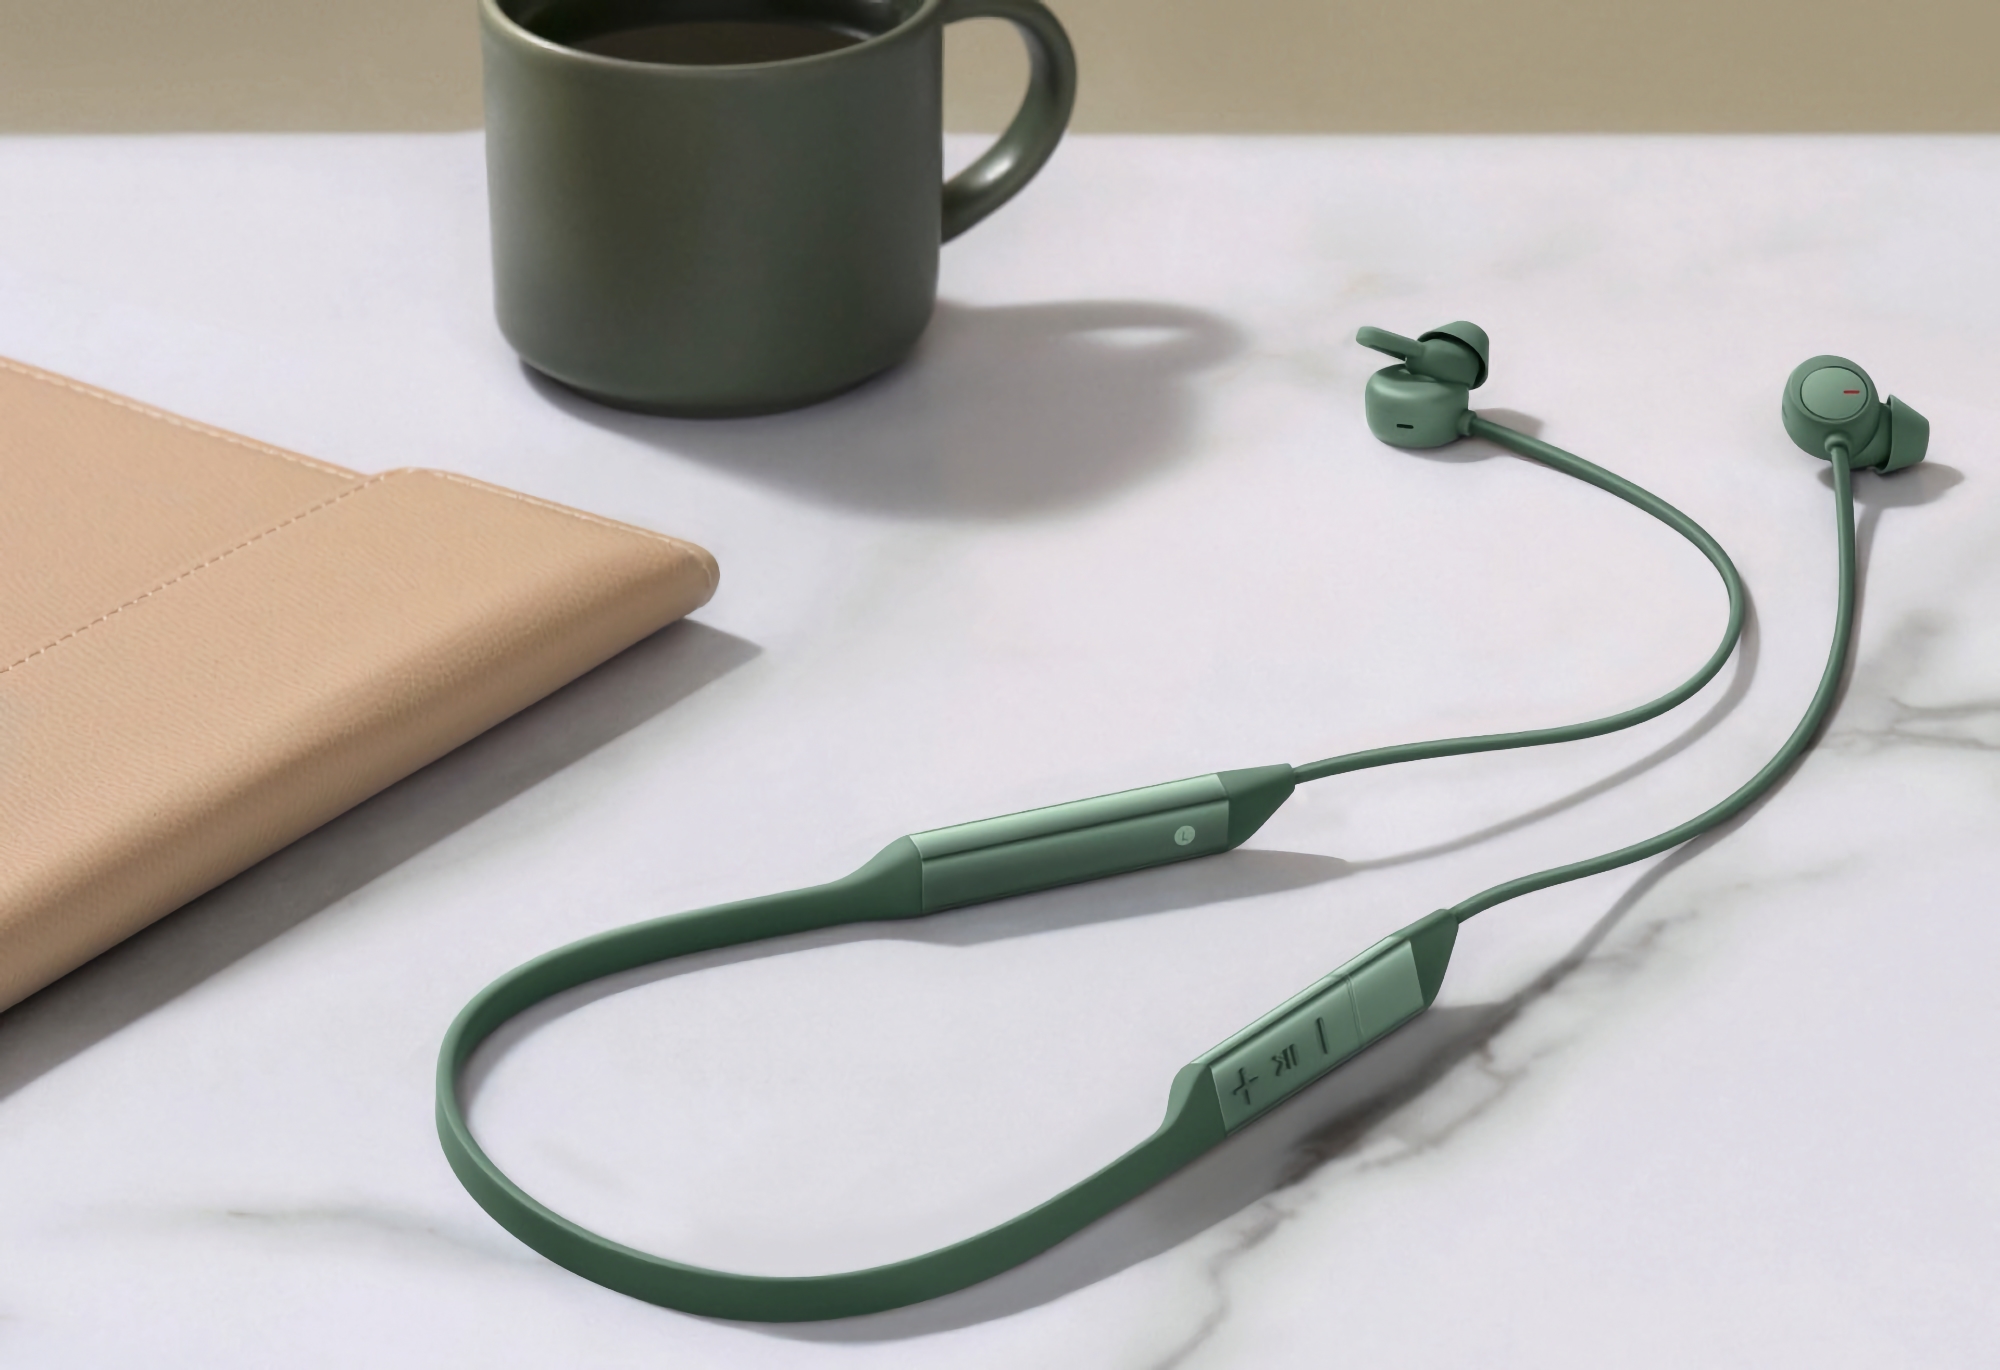 Insider: Huawei will introduce the FreeLace Pro 2 headphones along with the Pocket 2 clamshell